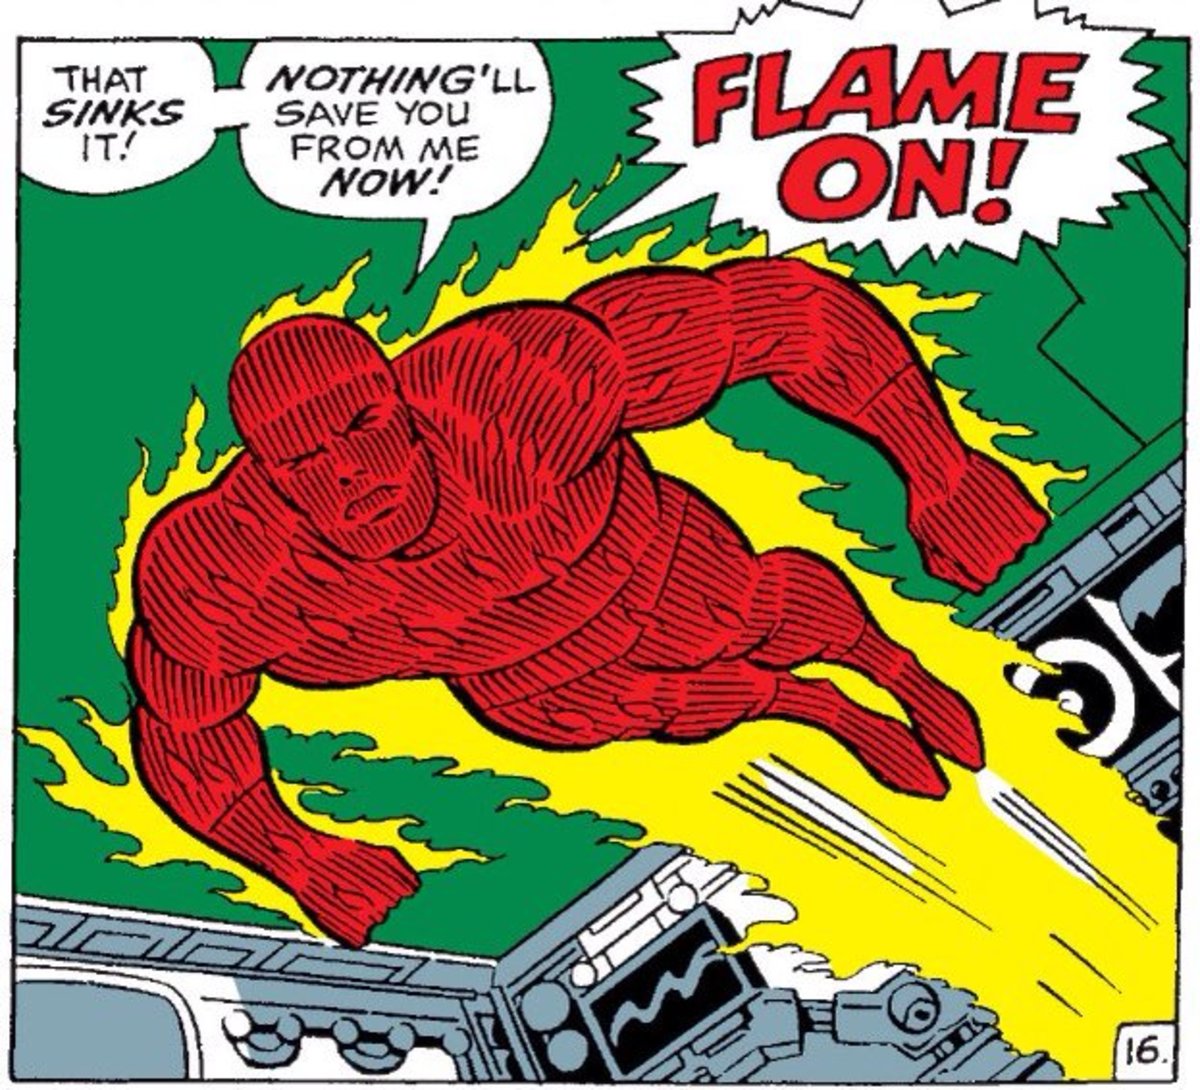 Johnny Storm, The Human Torch from the Fantastic Four